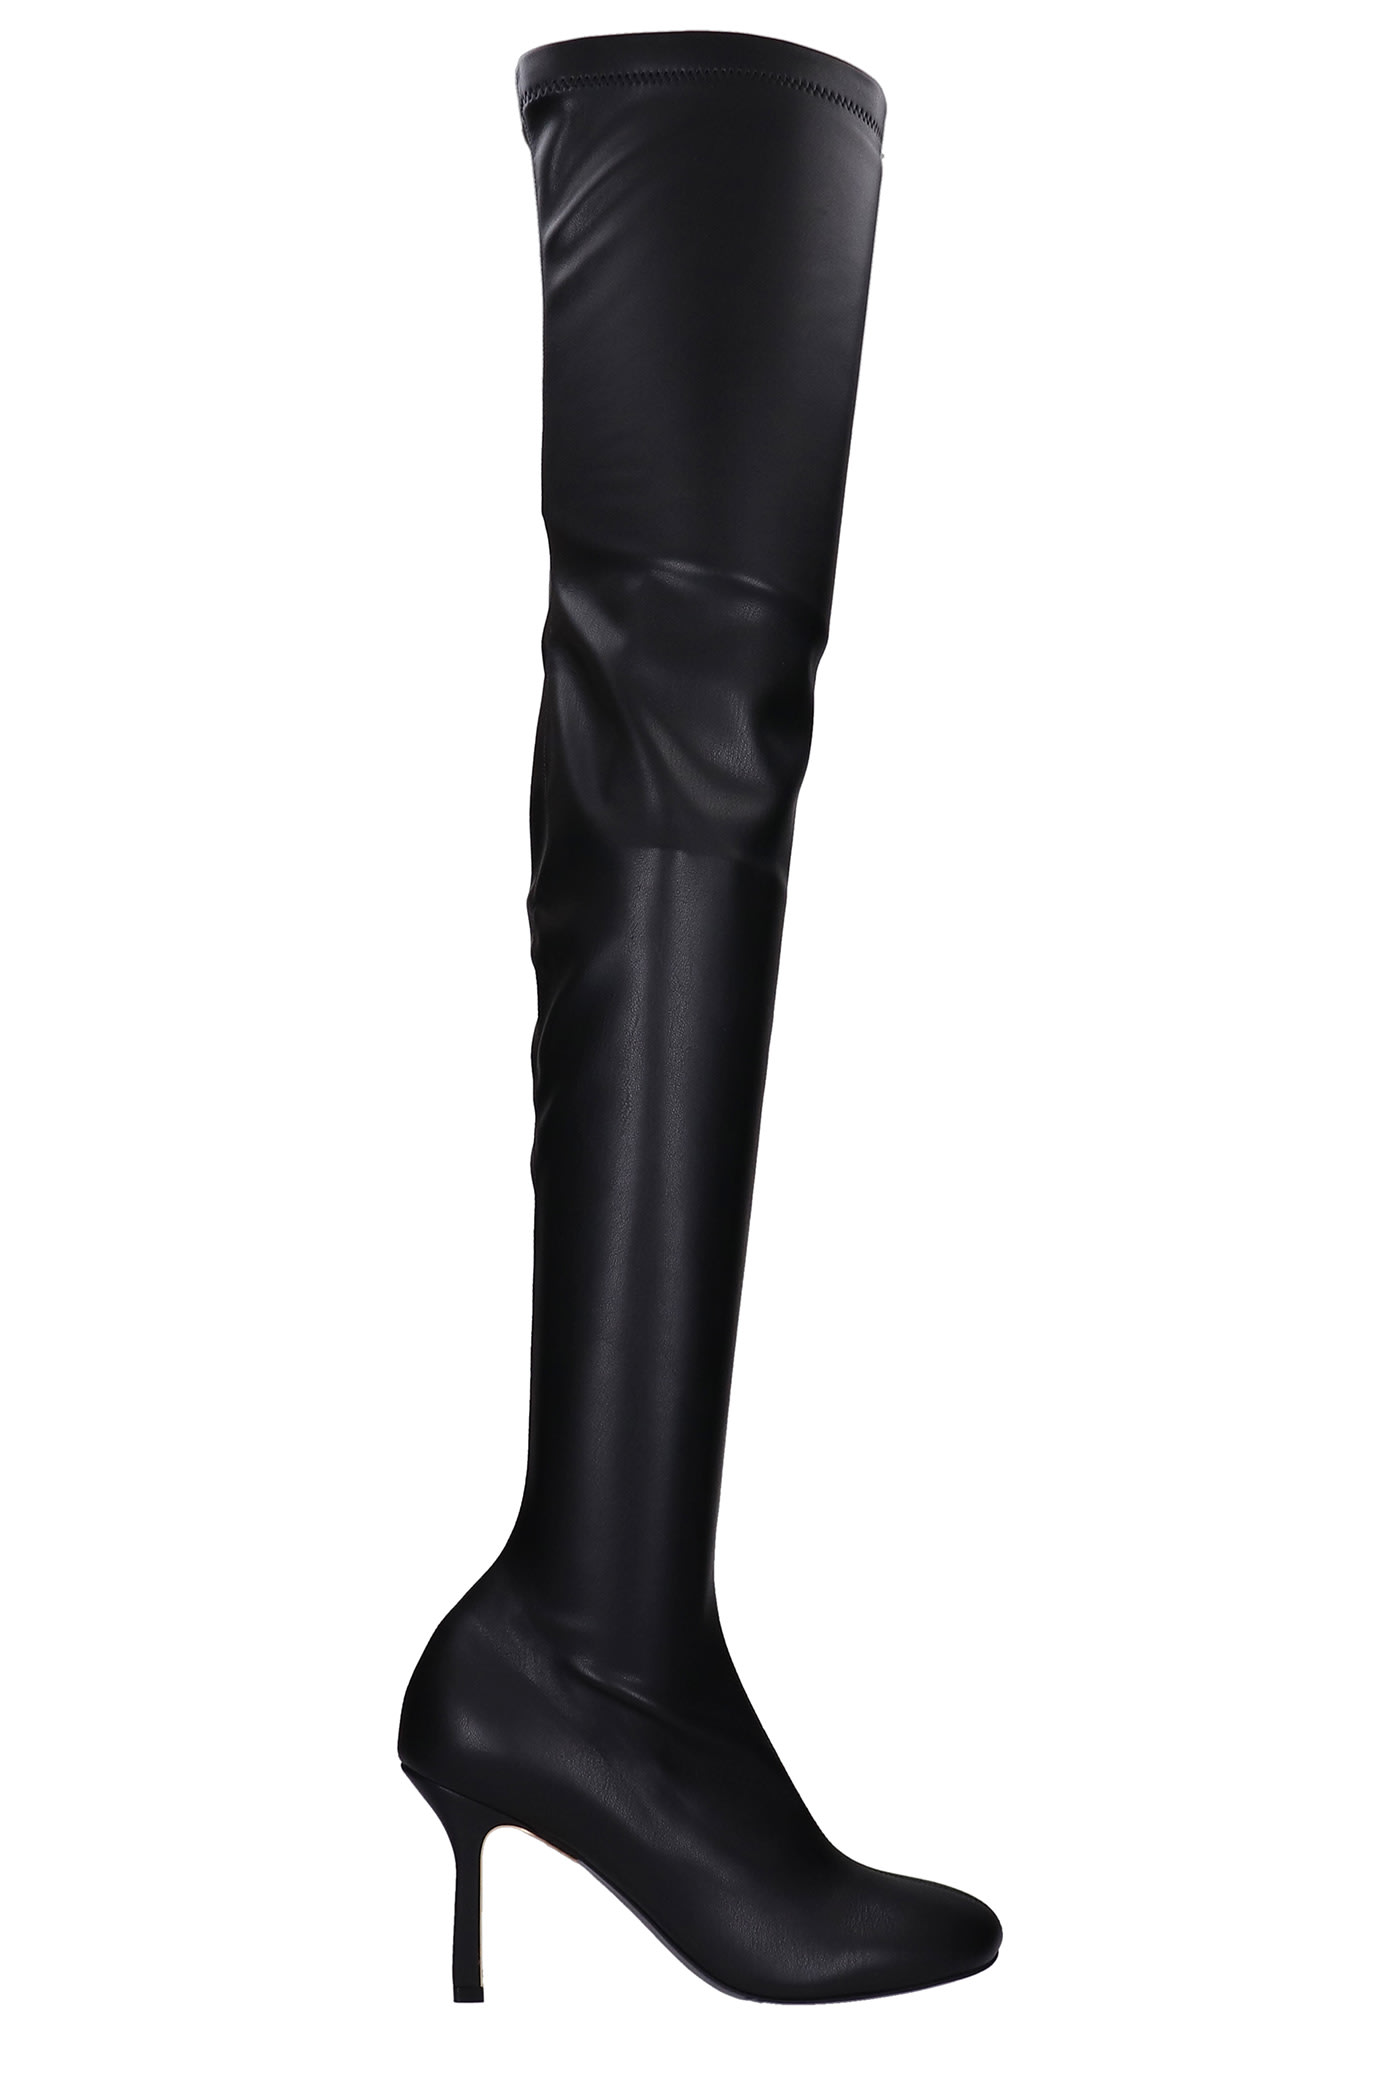 Stella McCartney Ivy High Heels Boots In Black Faux Leather